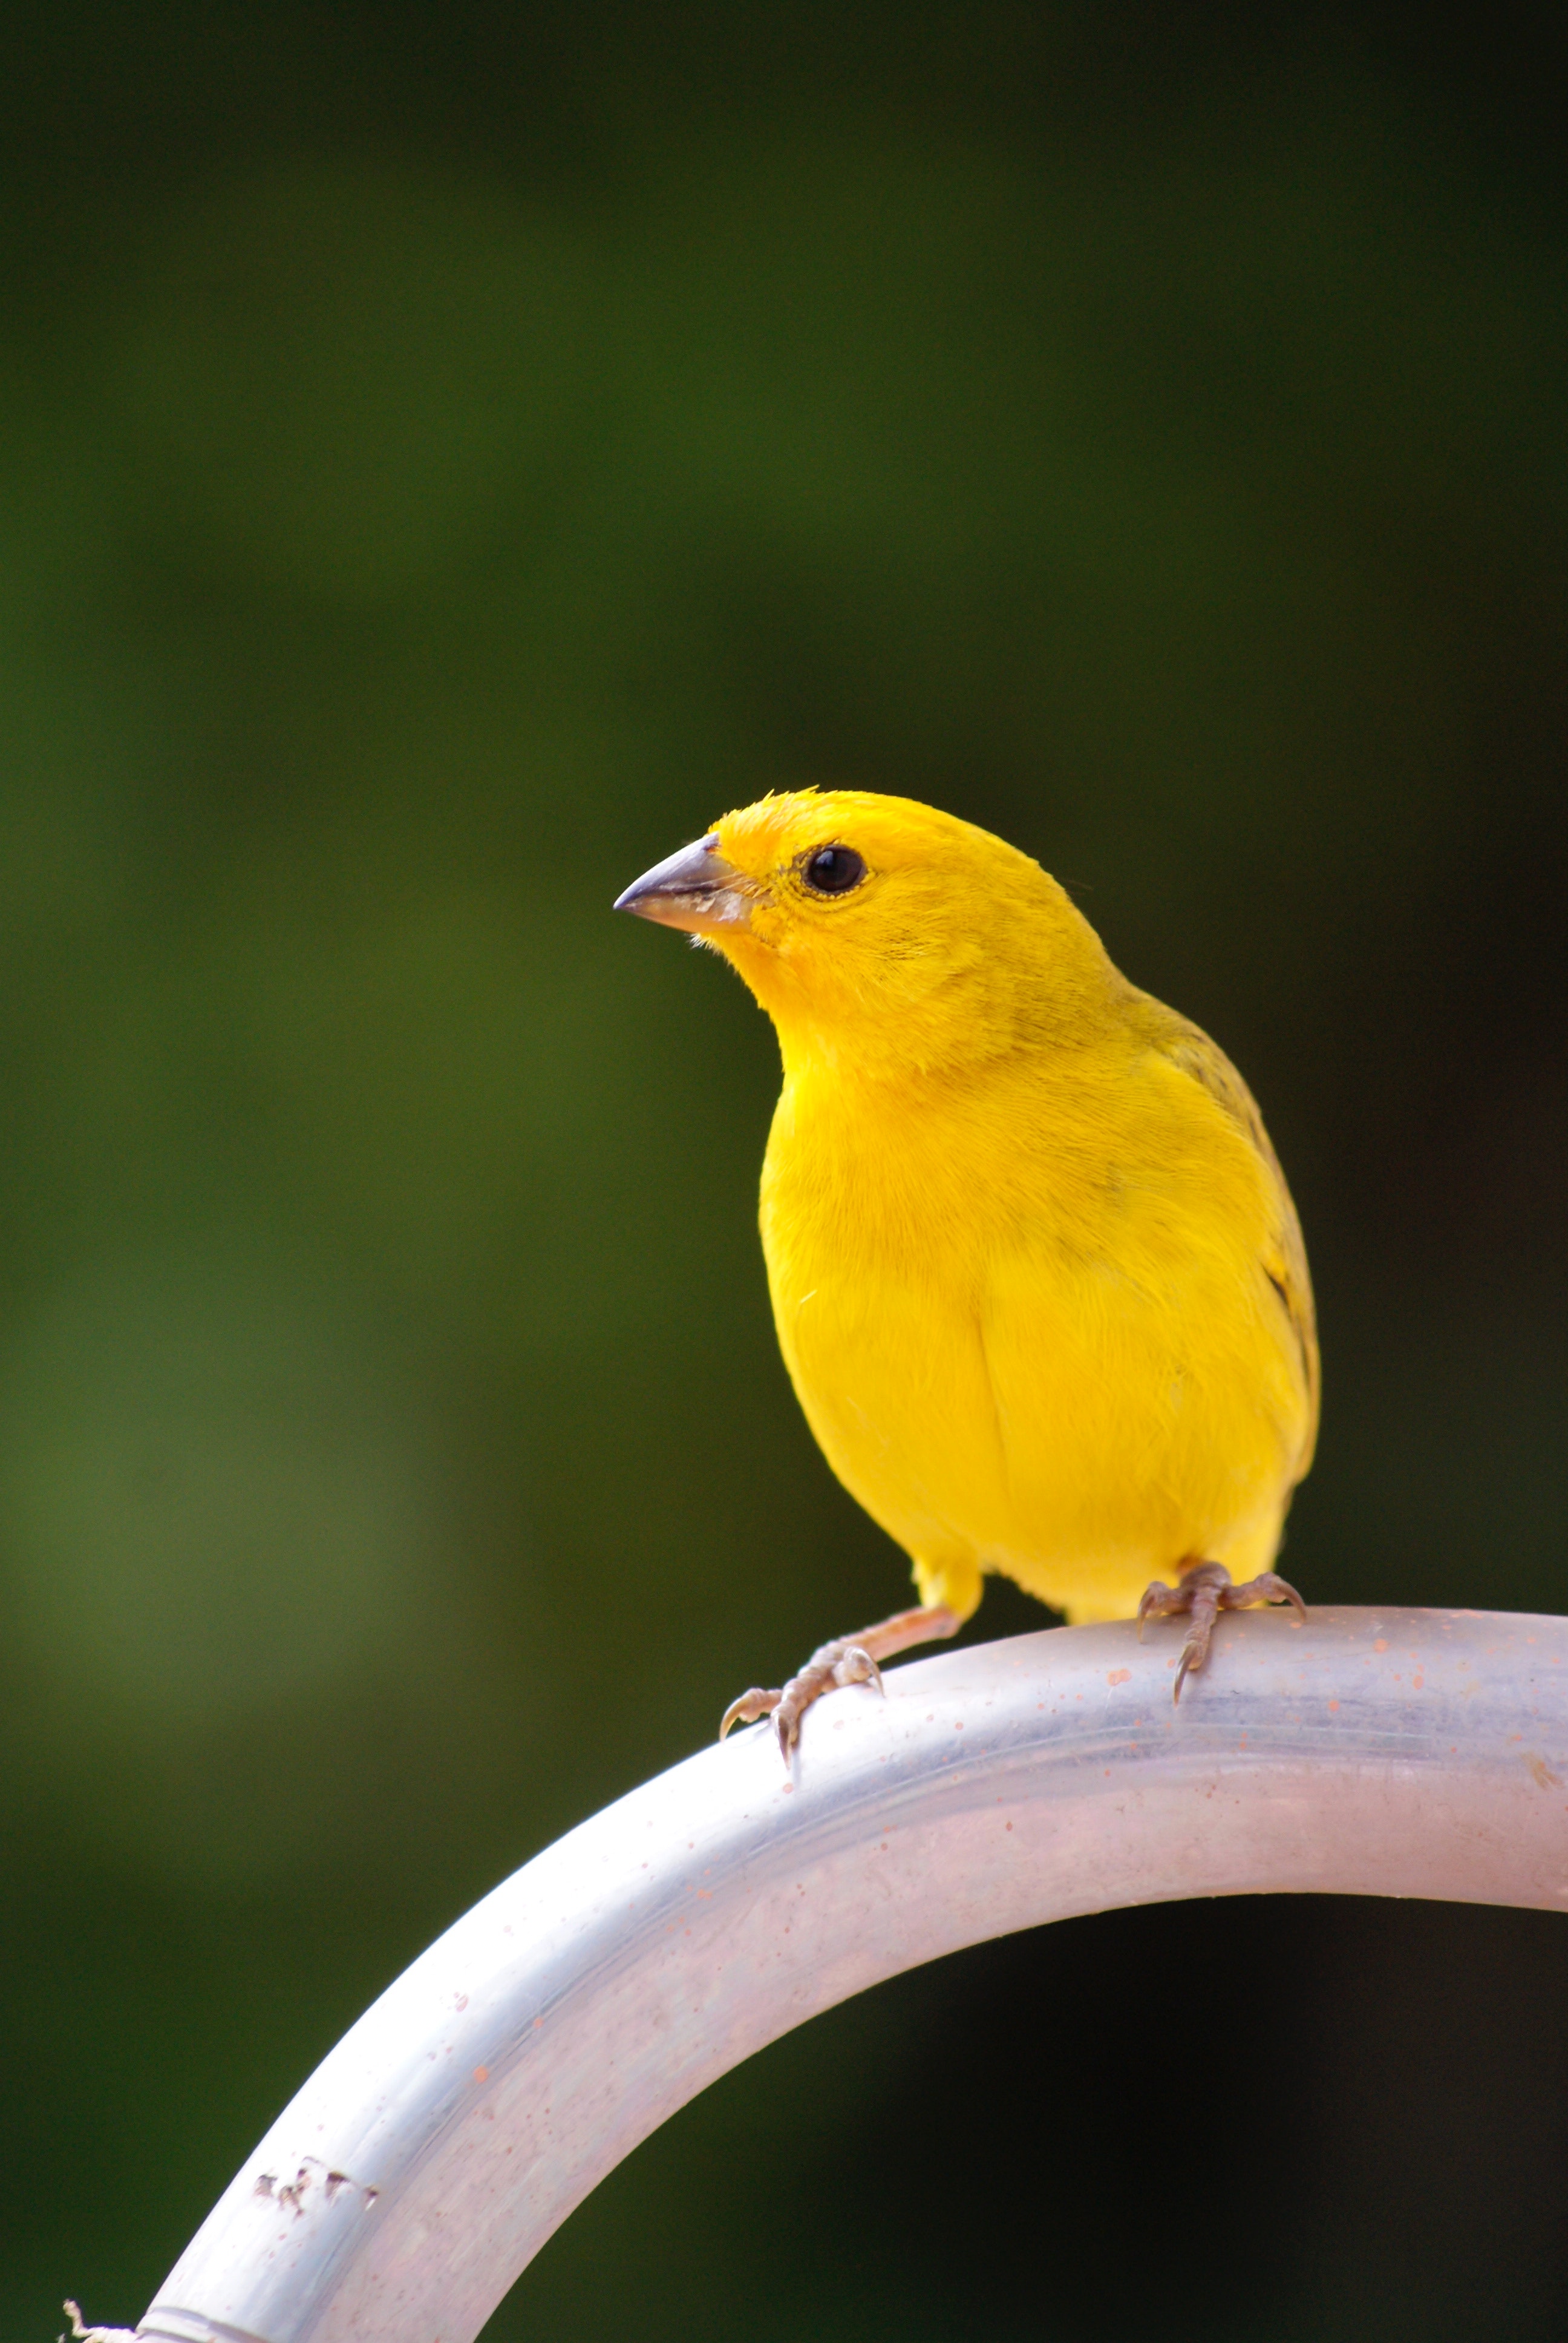 Canary bird photos download the best free canary bird stock photos hd images